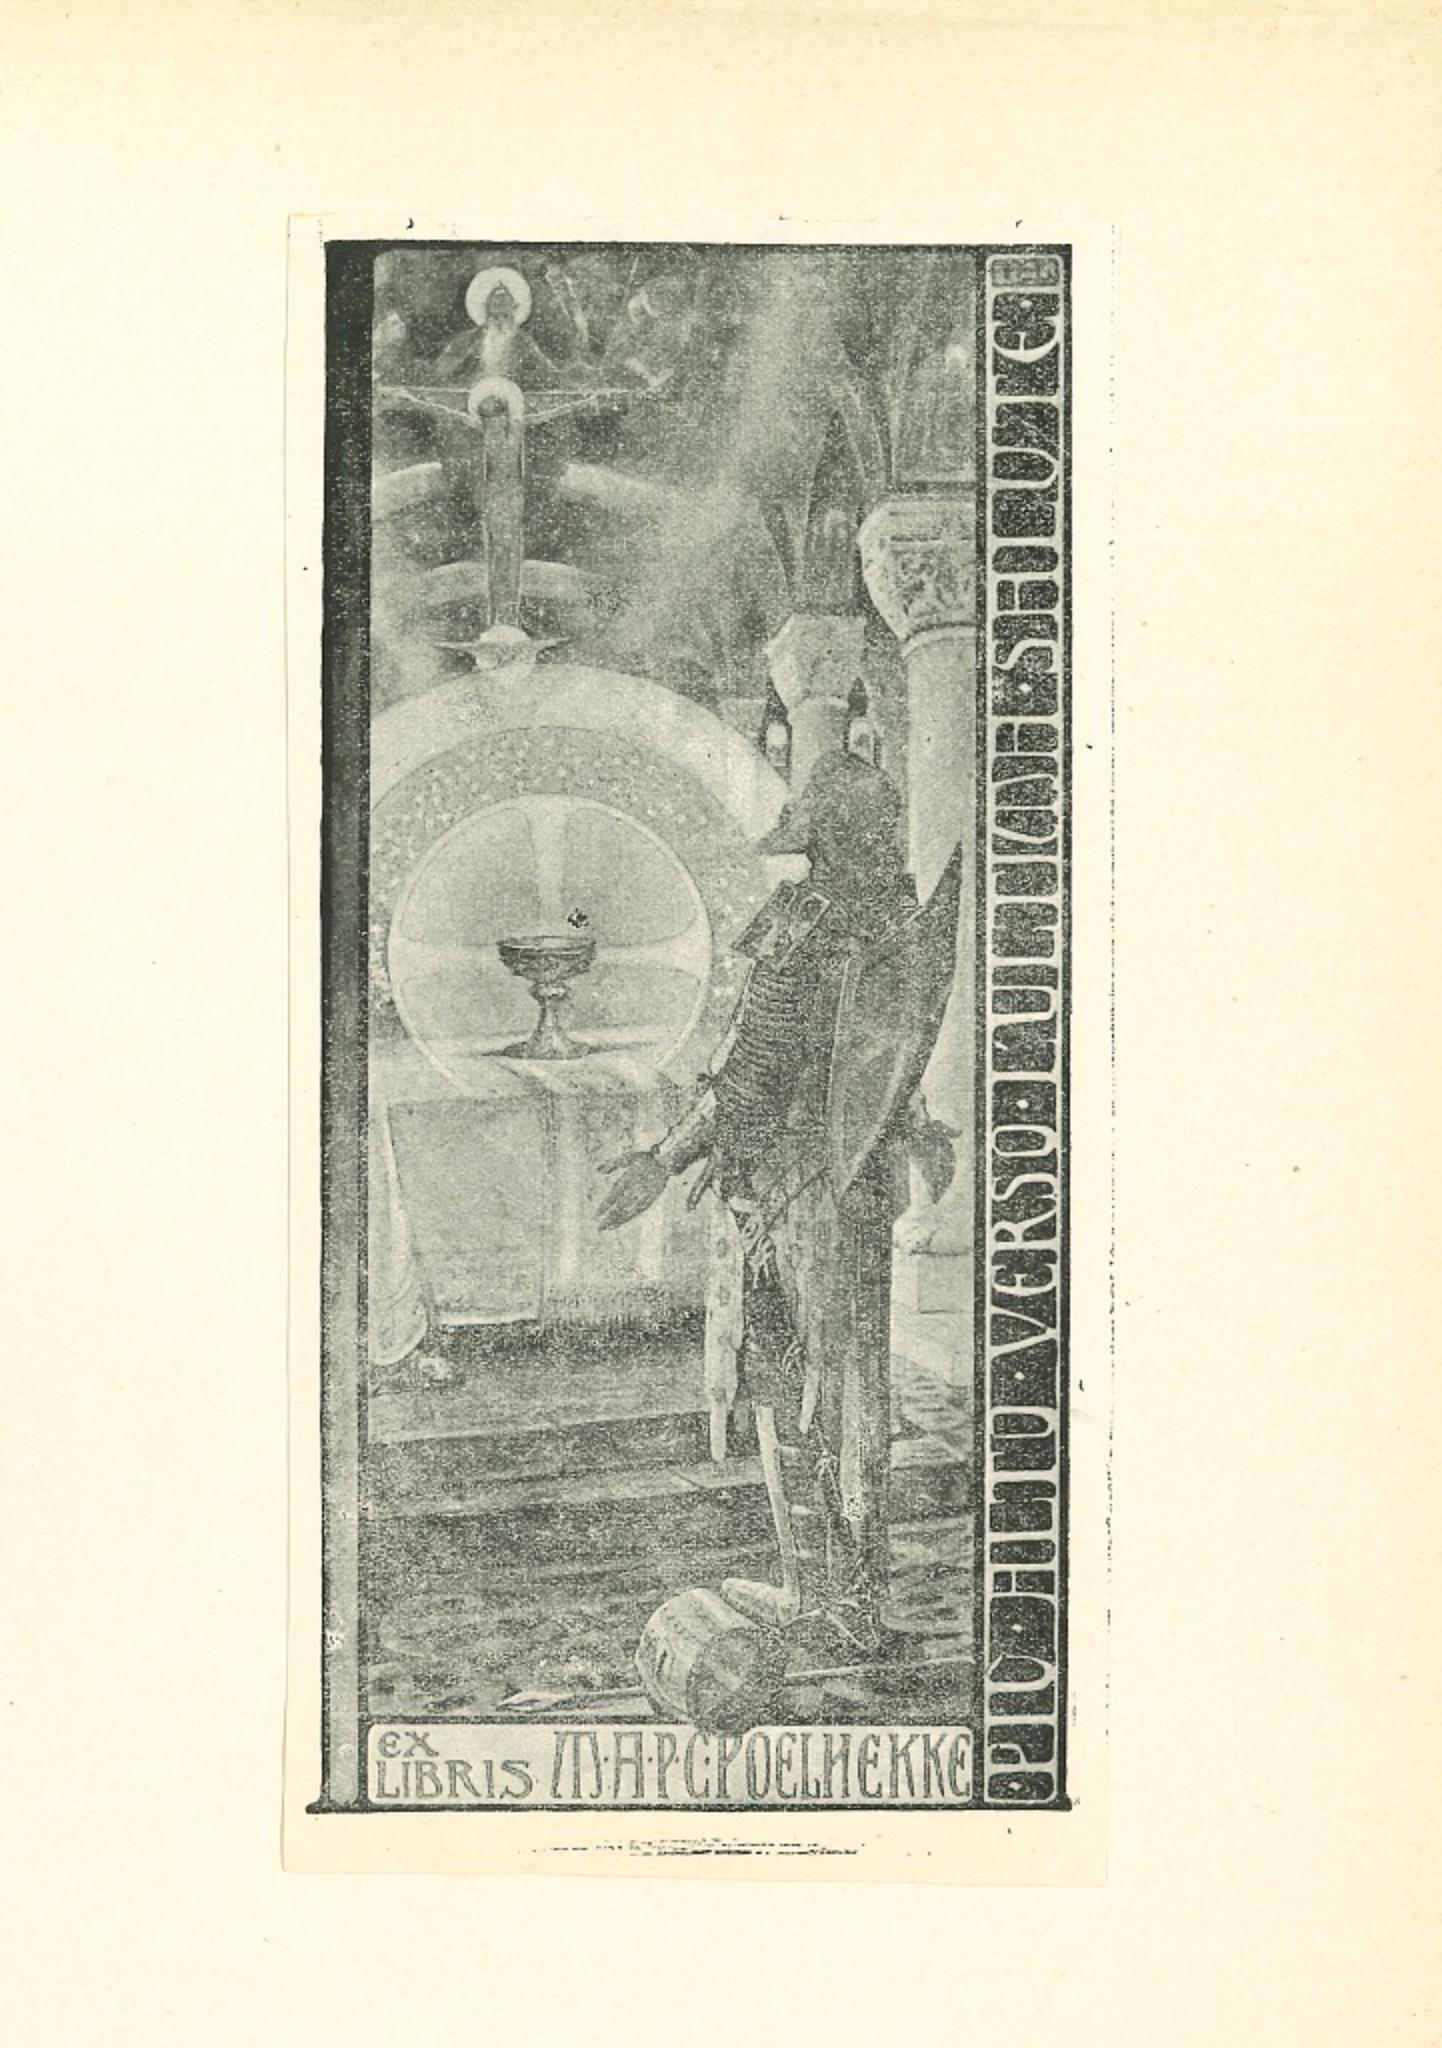 Unknown Figurative Print - Ex Libris with Knight - Vintage Offset Print - Early 20th Century